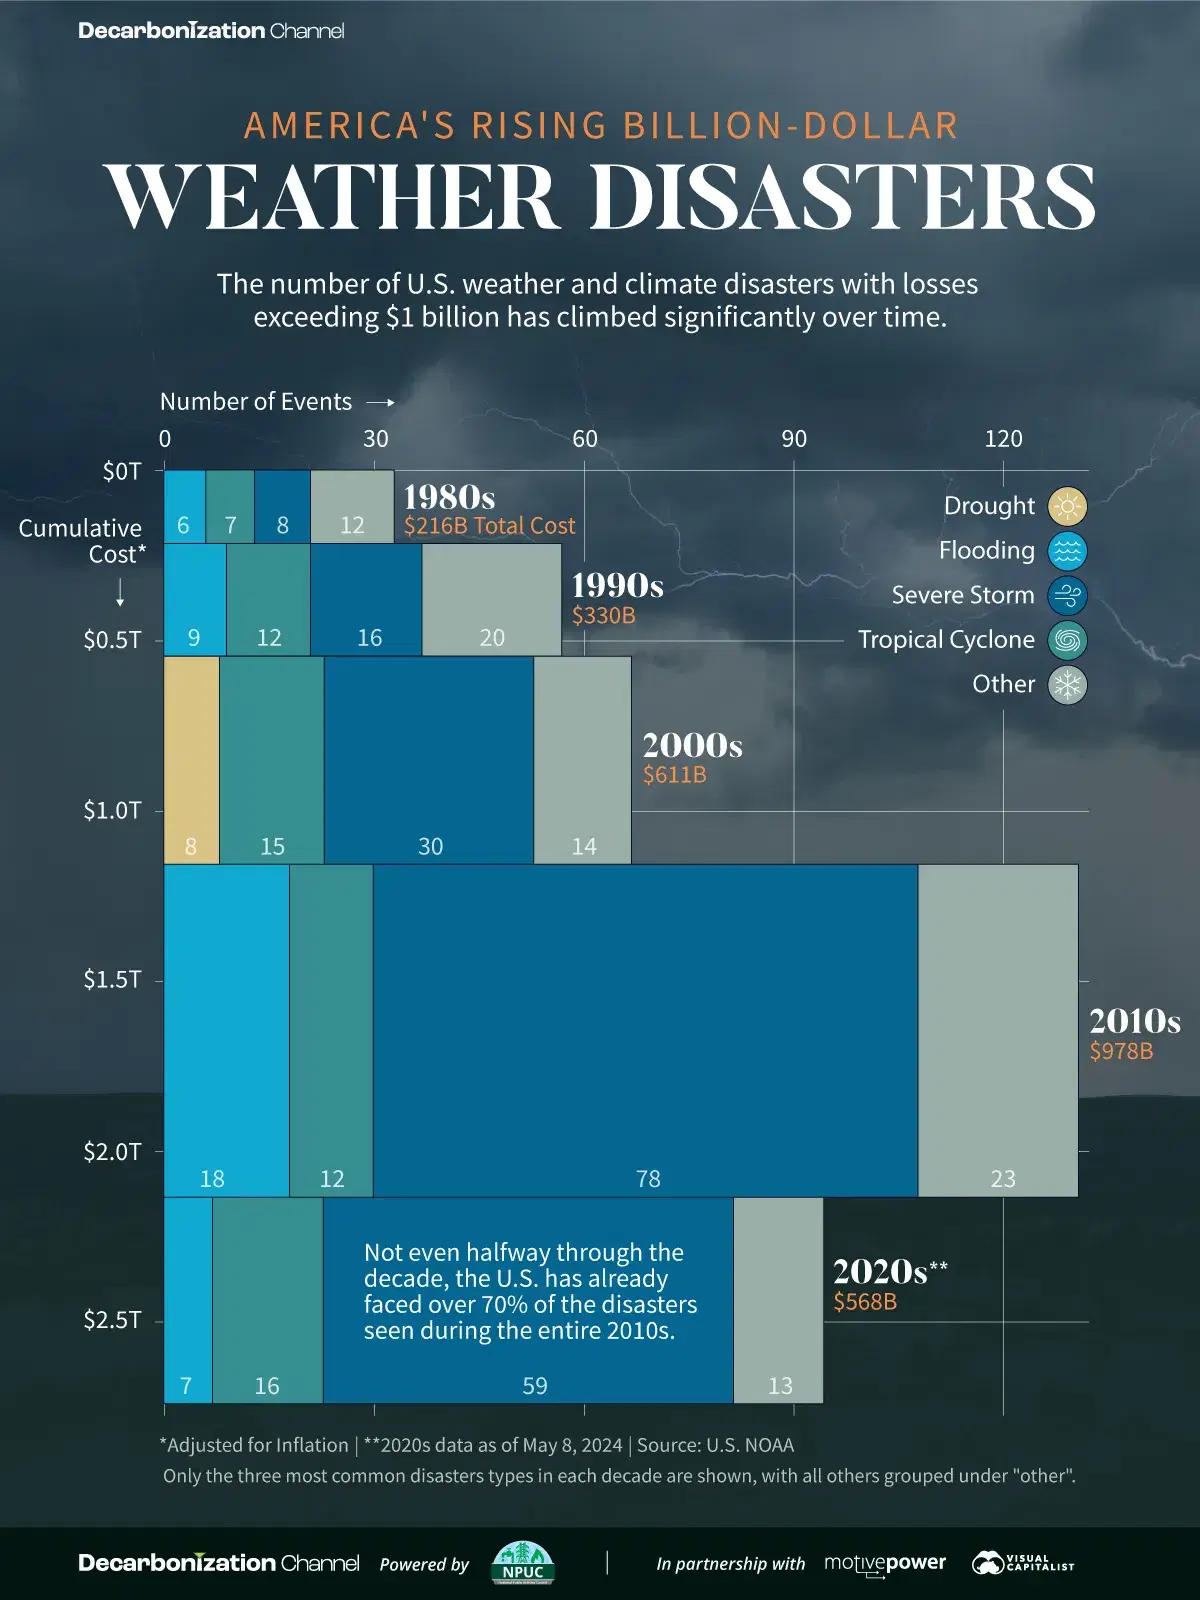 The Rise in America's Billion-Dollar Extreme Weather Disasters